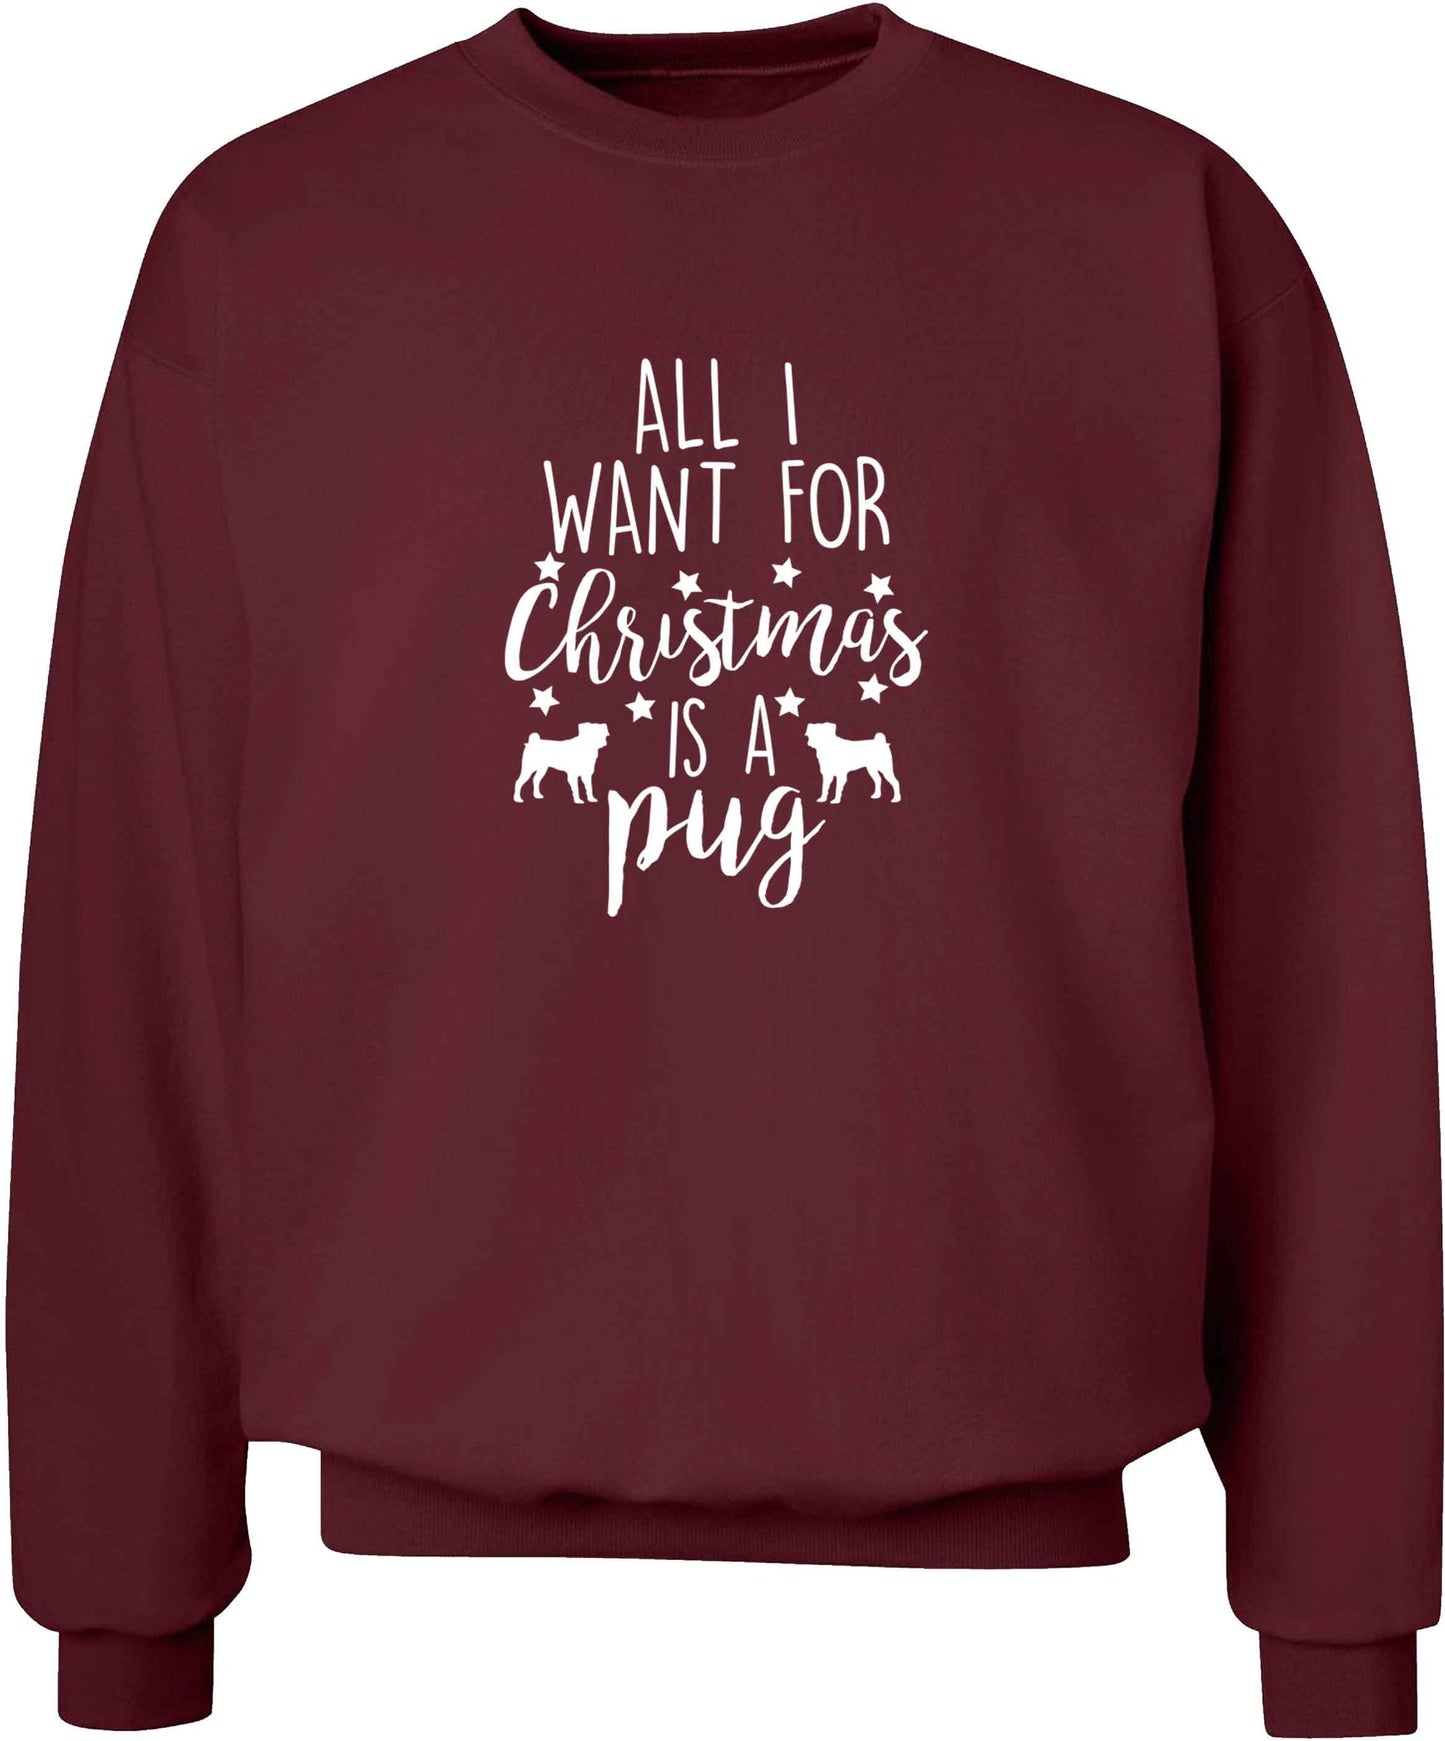 All I want for Christmas is a pug adult's unisex maroon sweater 2XL